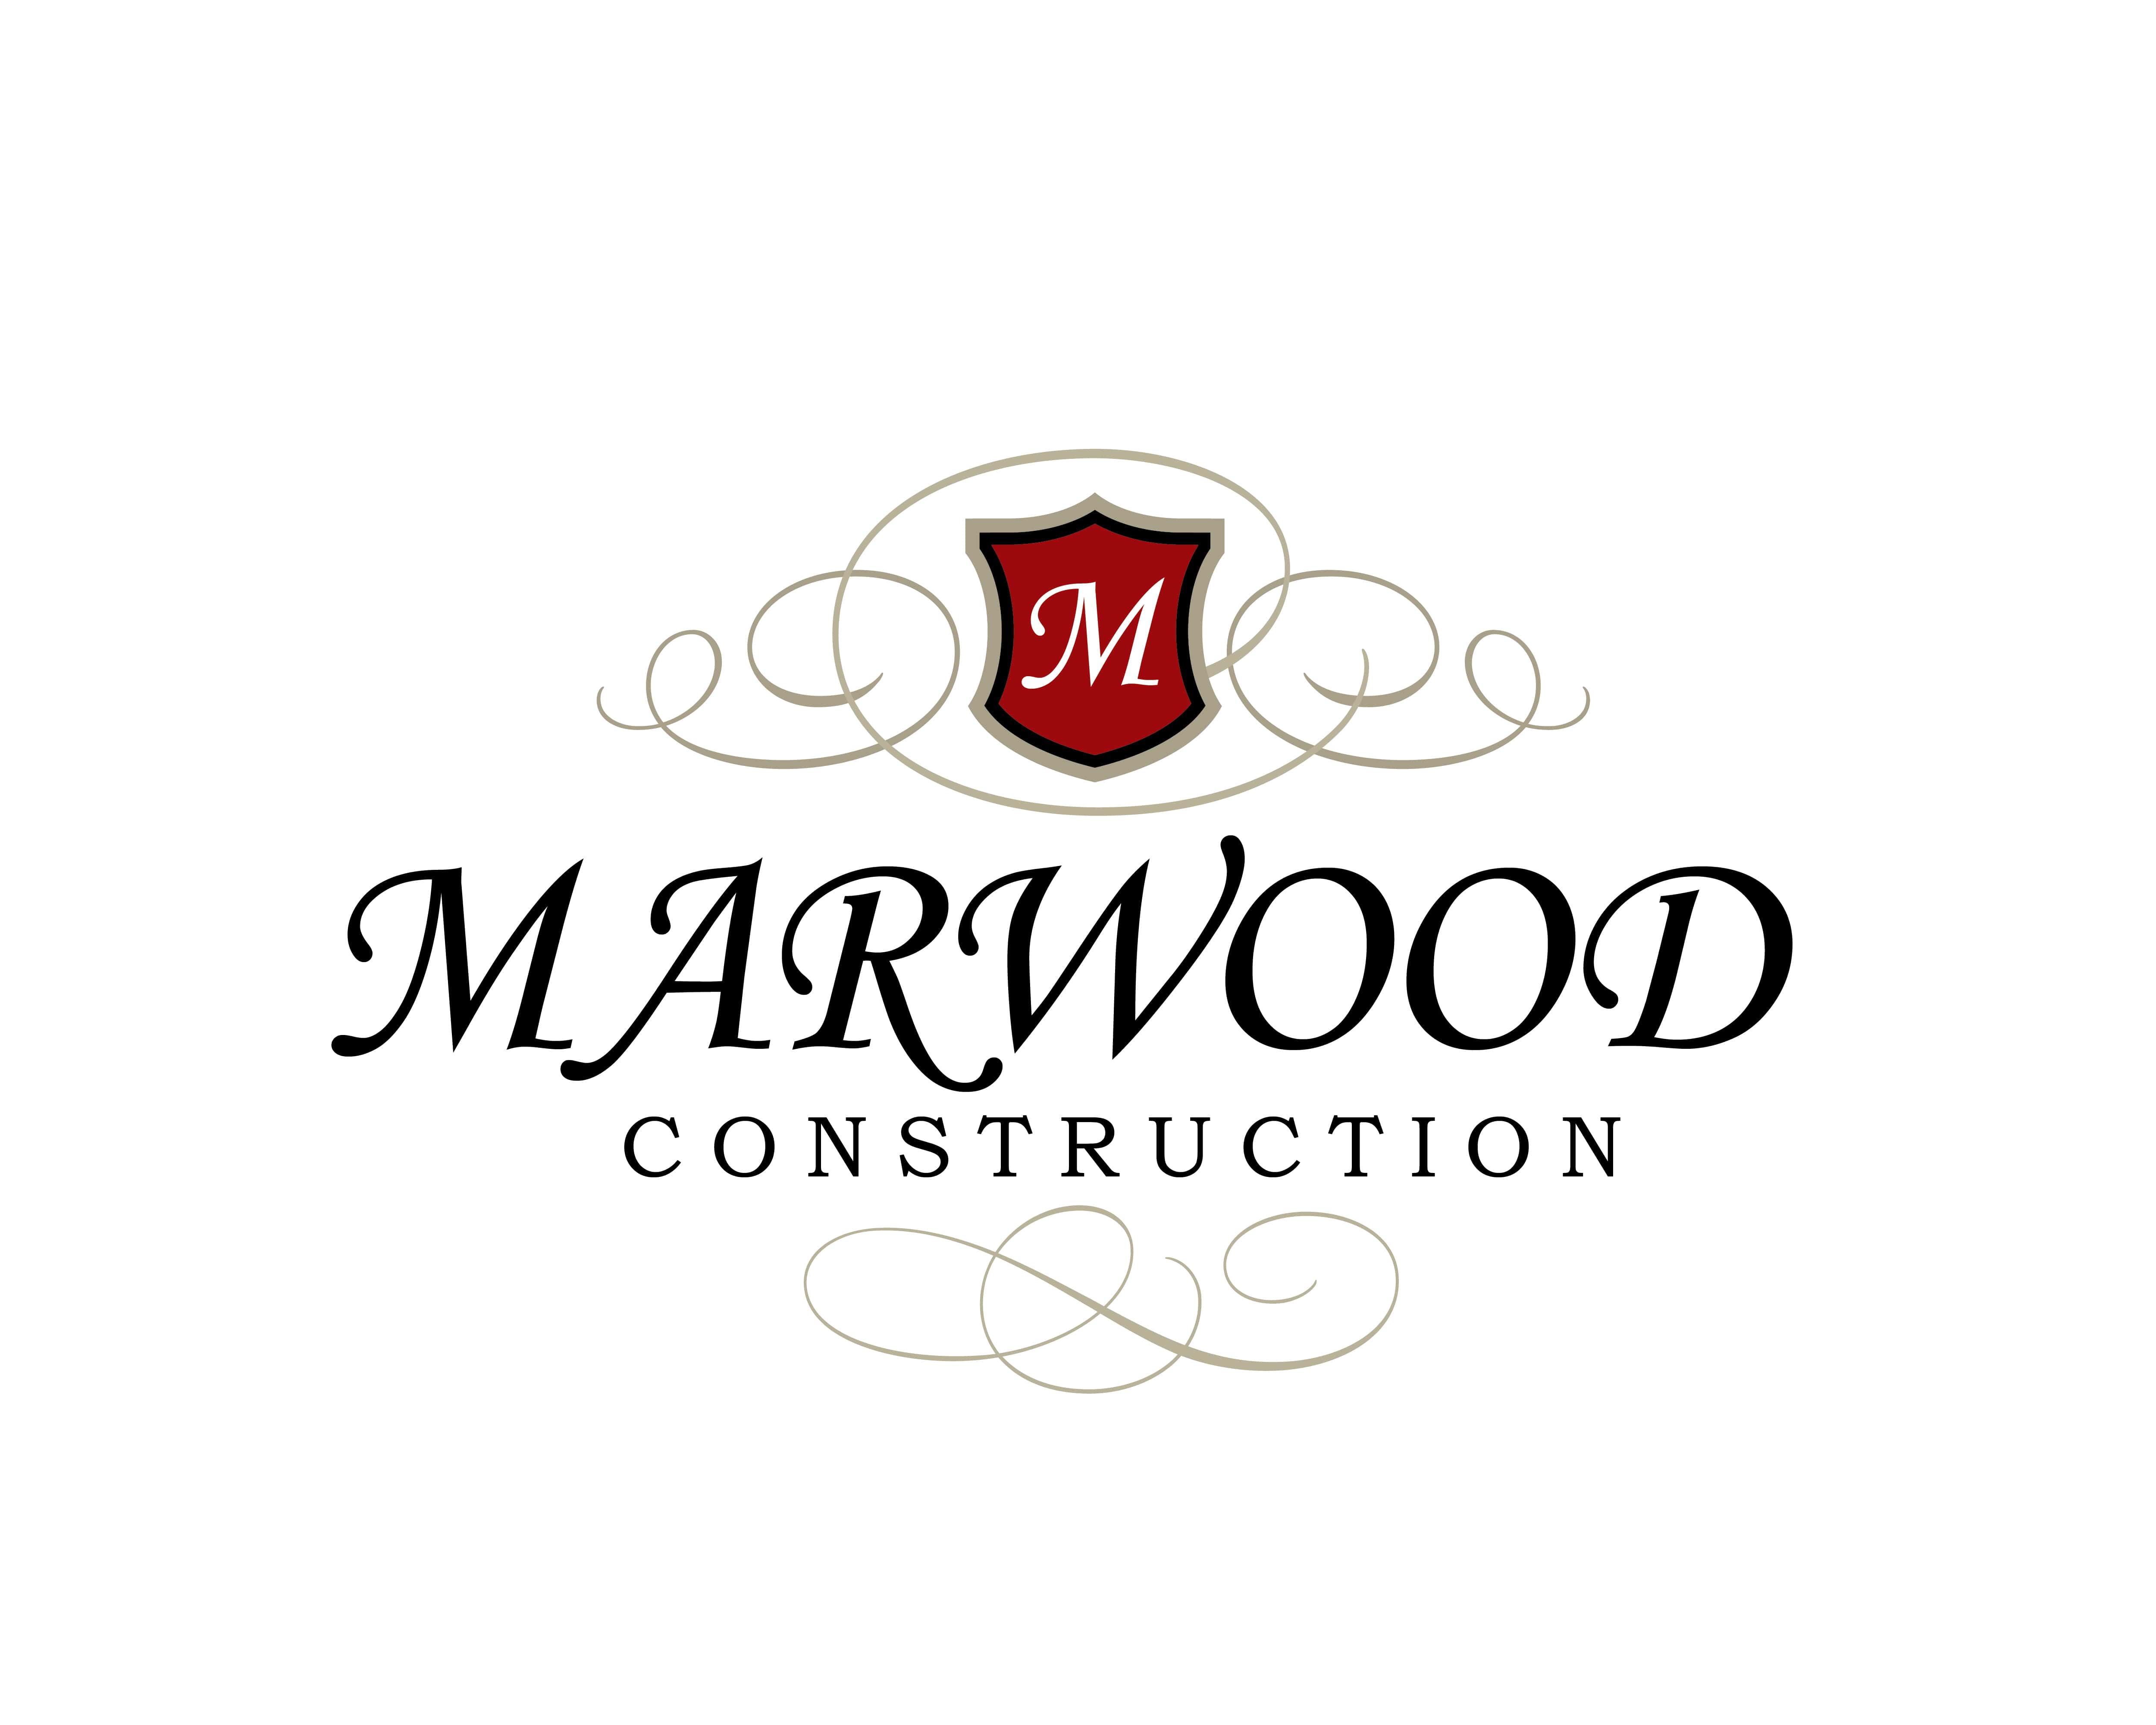 Professional Houston General Contractor - Marwood Construction